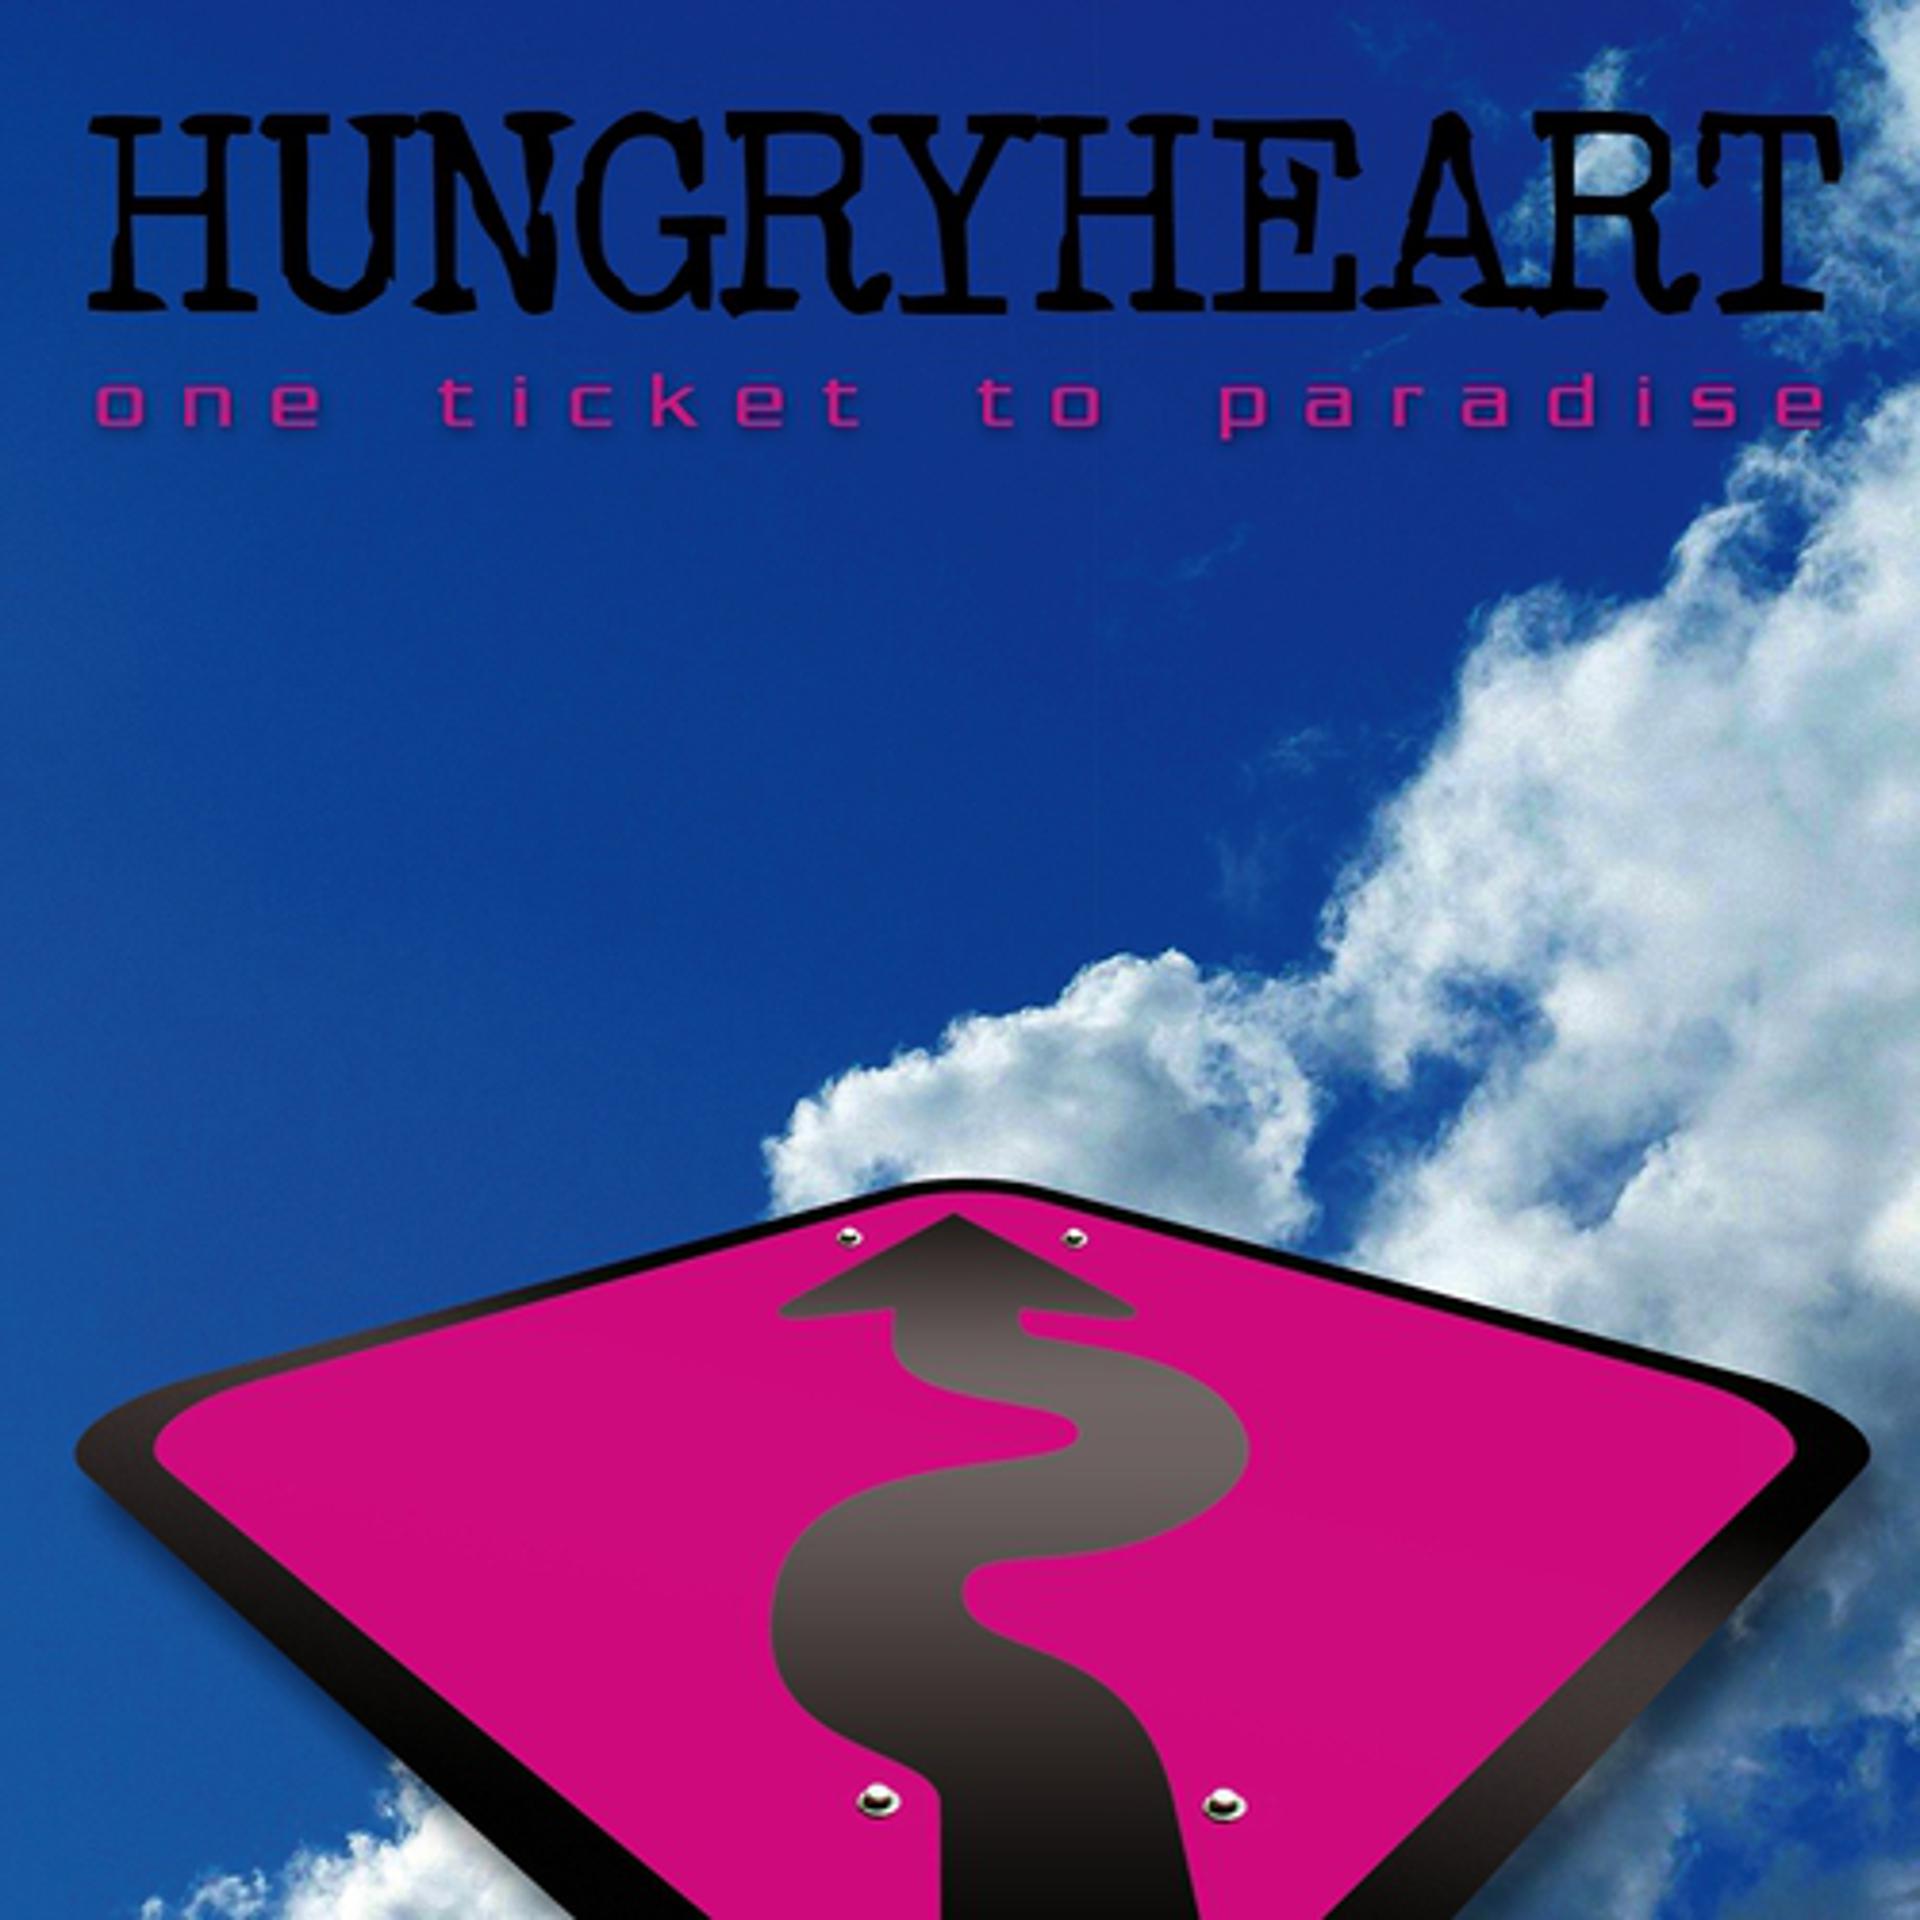 A million miles away. One ticket to Paradise - Hungryheart. Hungry Heart one ticket to Paradise. Ticket to Paradise. Somebody to Love обложка.